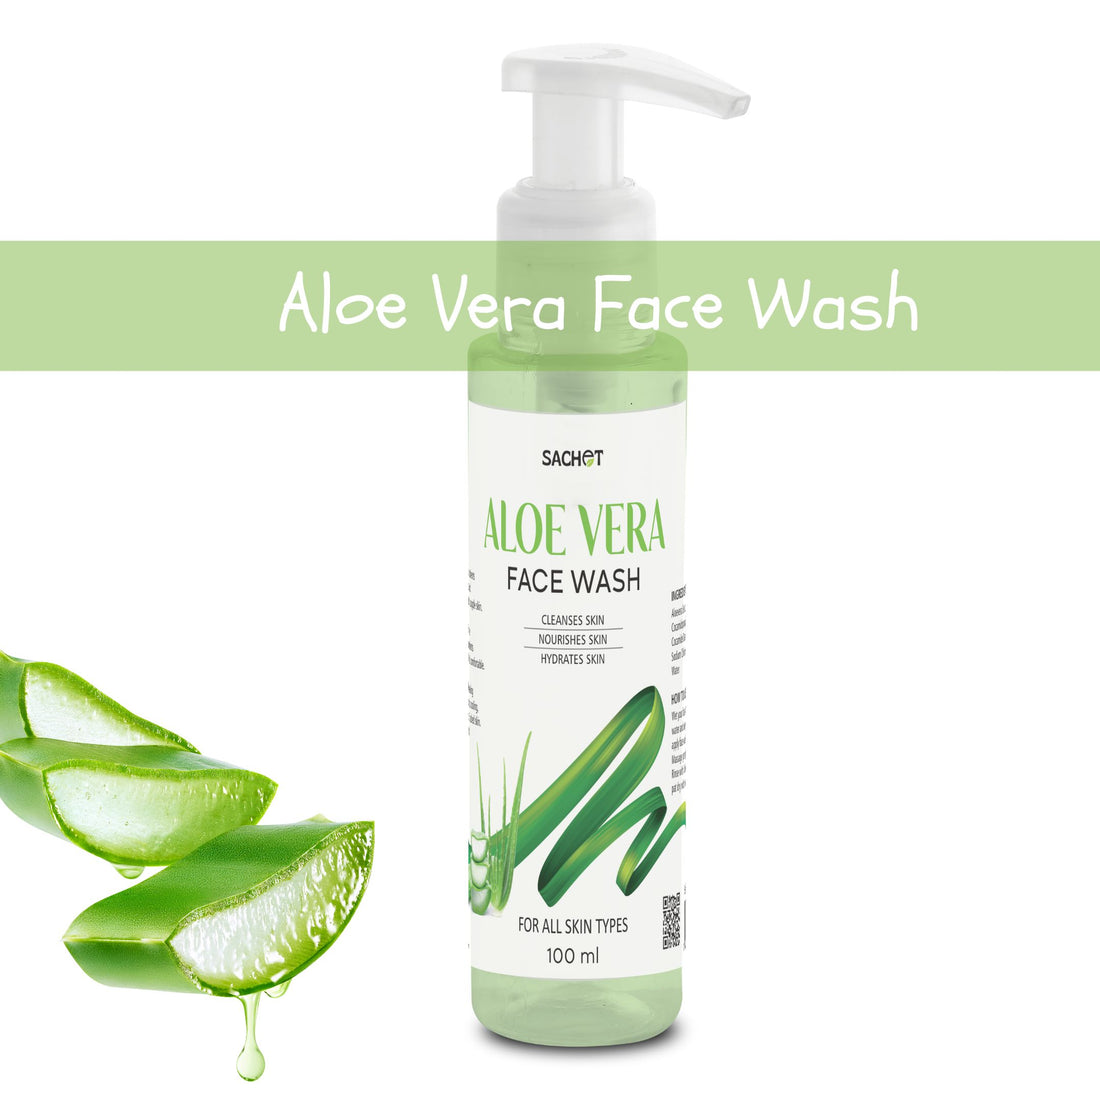 Aloe Vera Face Wash: Refreshing Cleanse for Glowing Skin